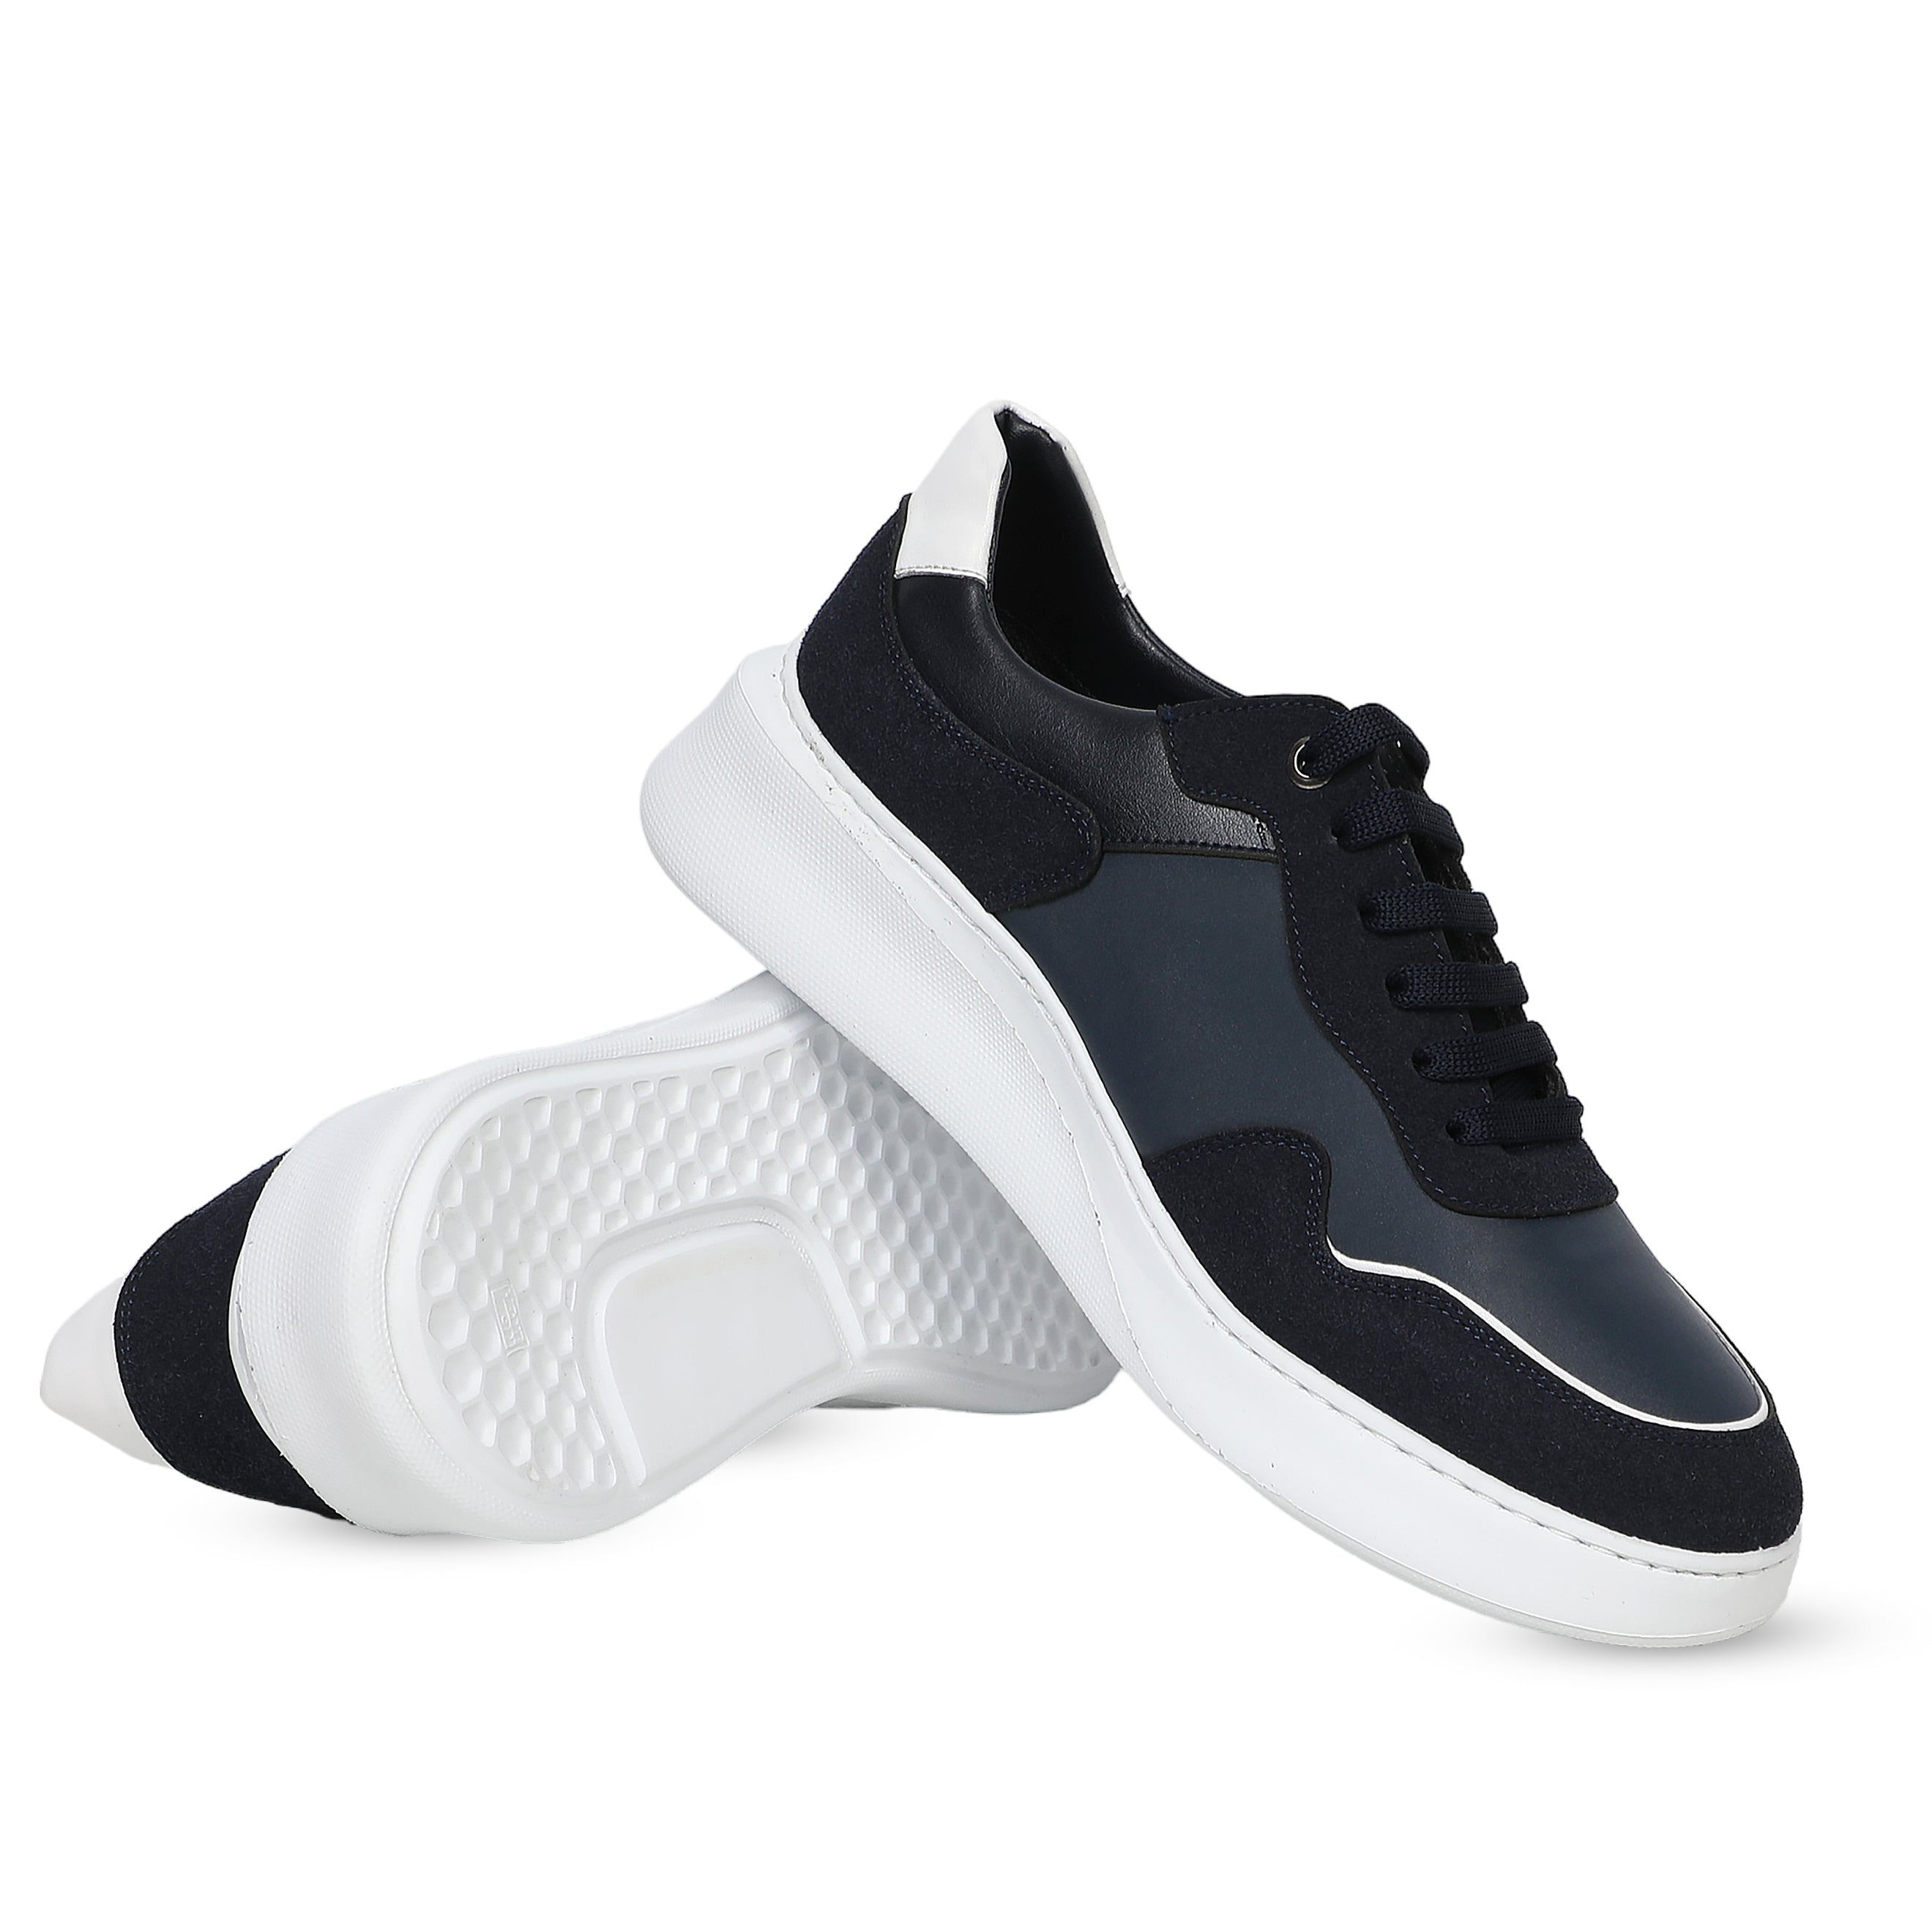 Men Casual Fashionable Navy Shoes